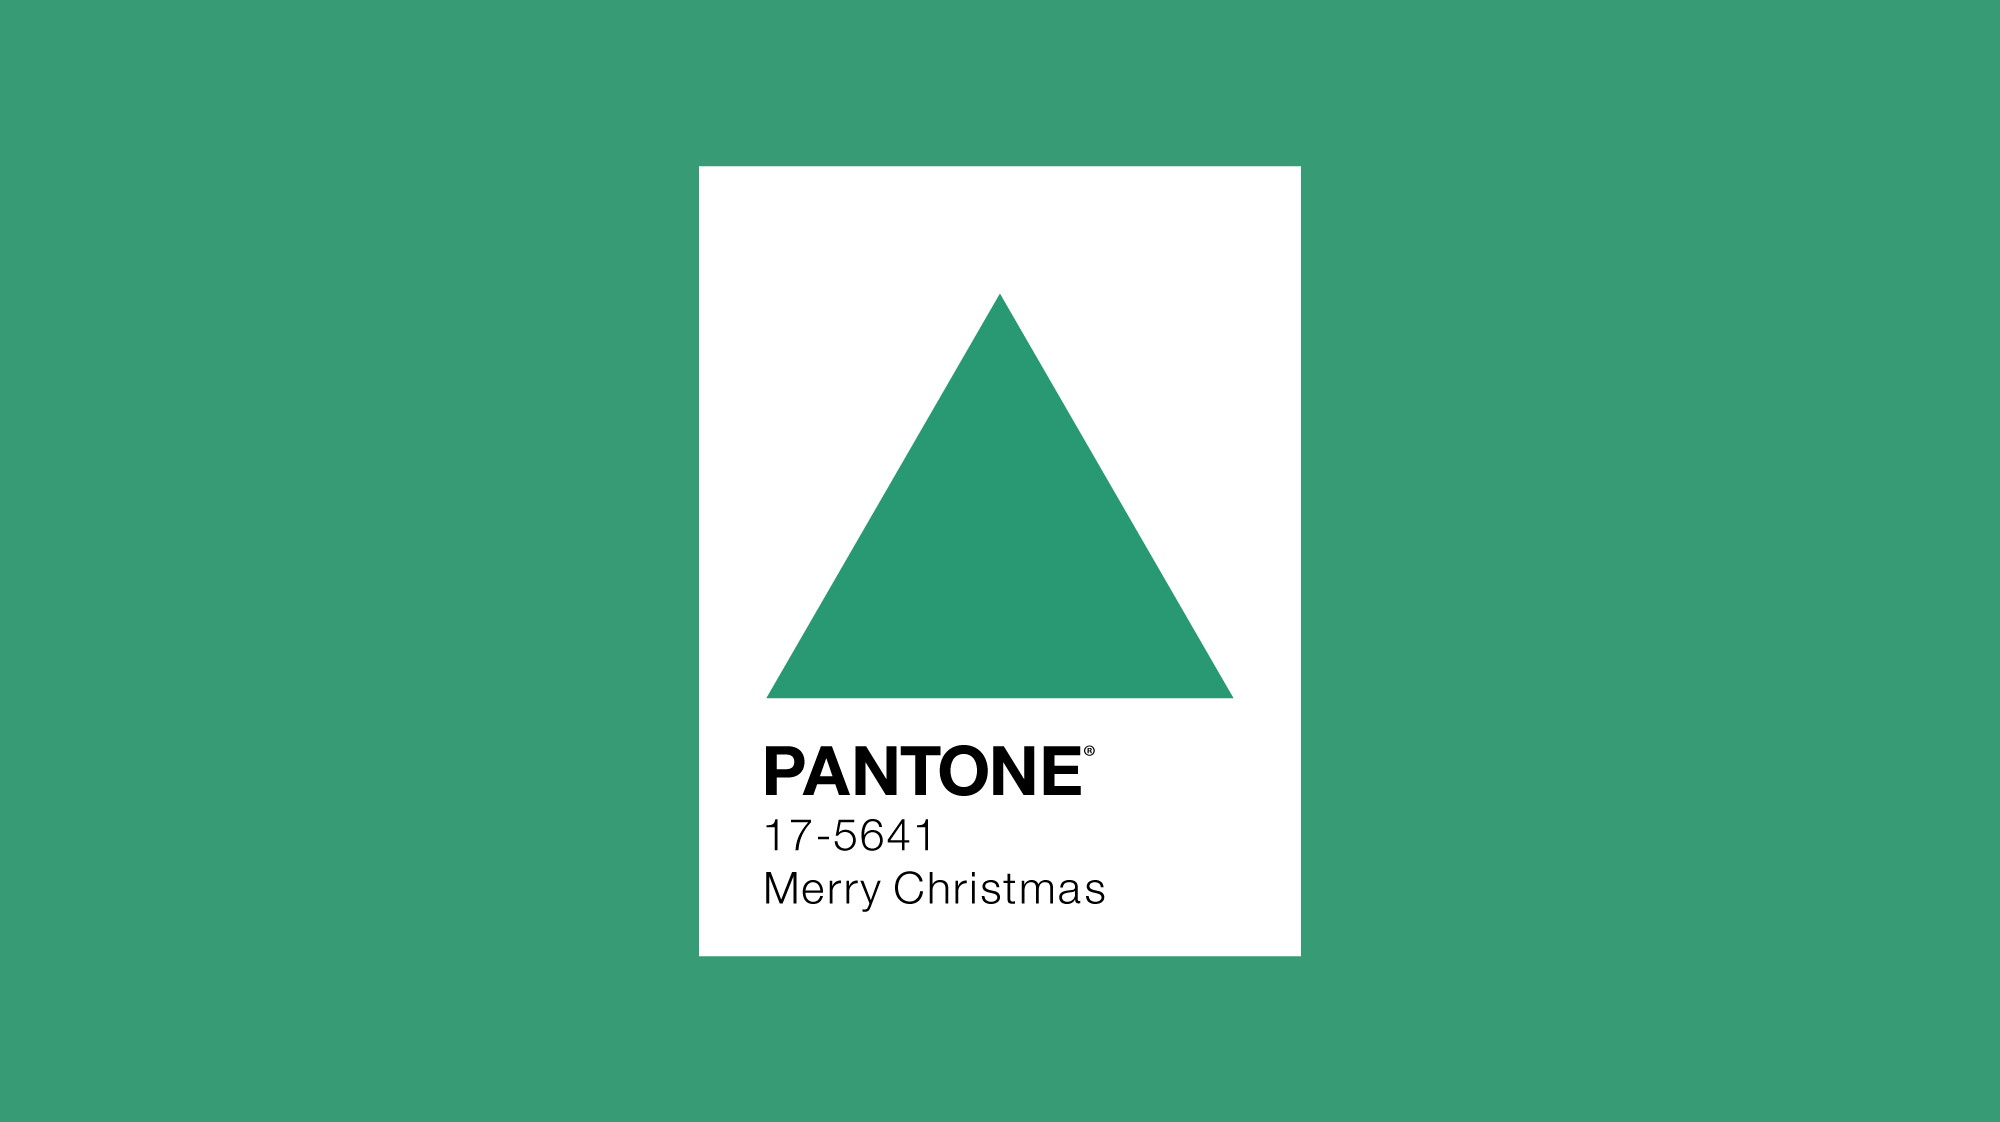 Pantone colour of the year 2013 minimal design with Christmas tree